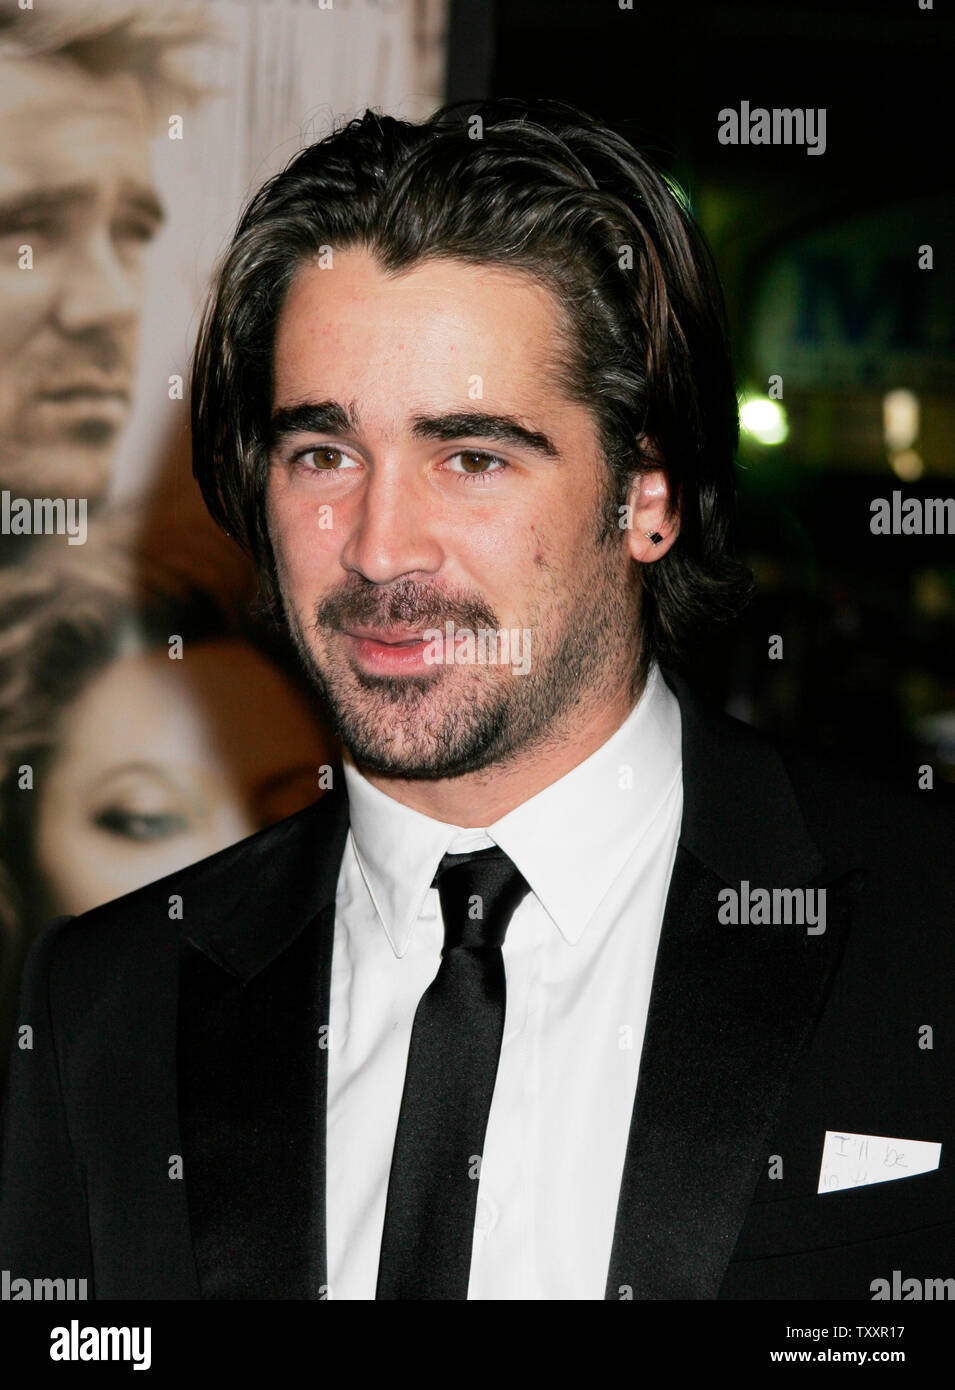 Actor and cast member Colin Farrell arrives at the November 16, 2004 Los  Angeles premiere of the film, 'Alexander' at Grauman's Chinese Theatre. The  Warner Bros. film will be released in the